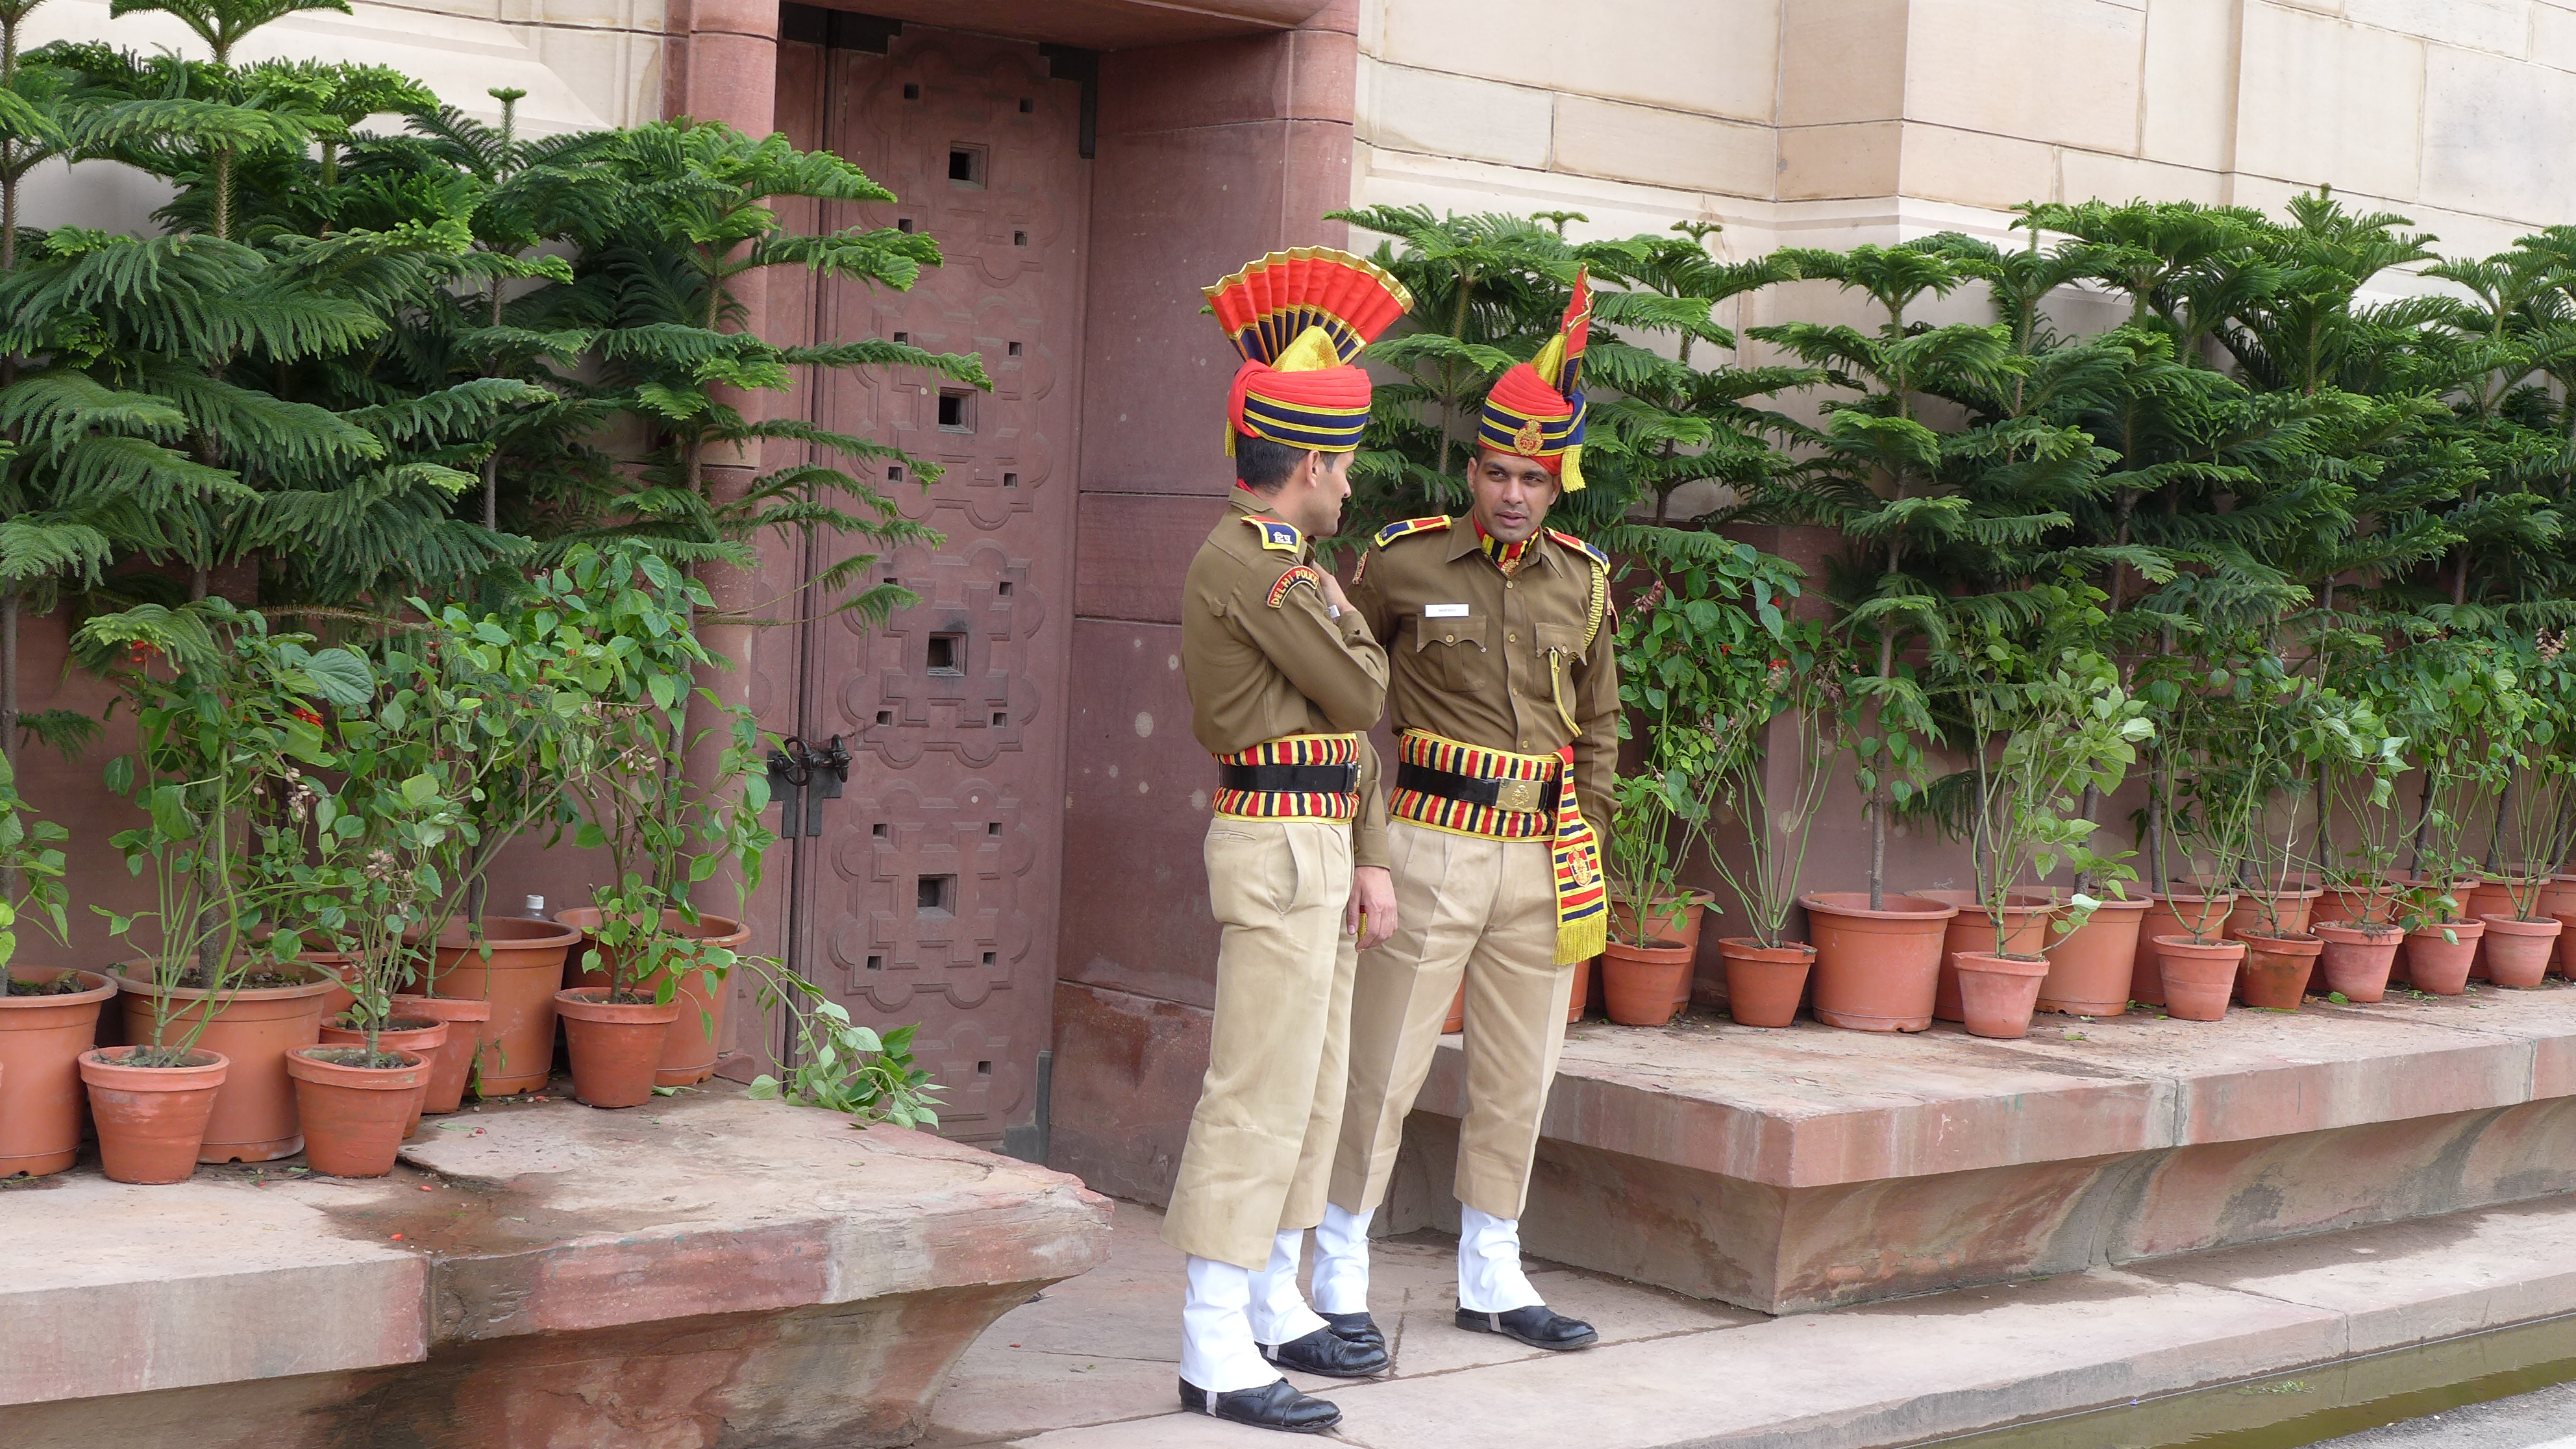 Full Ceremonial Dress for Indian Soldiers.  